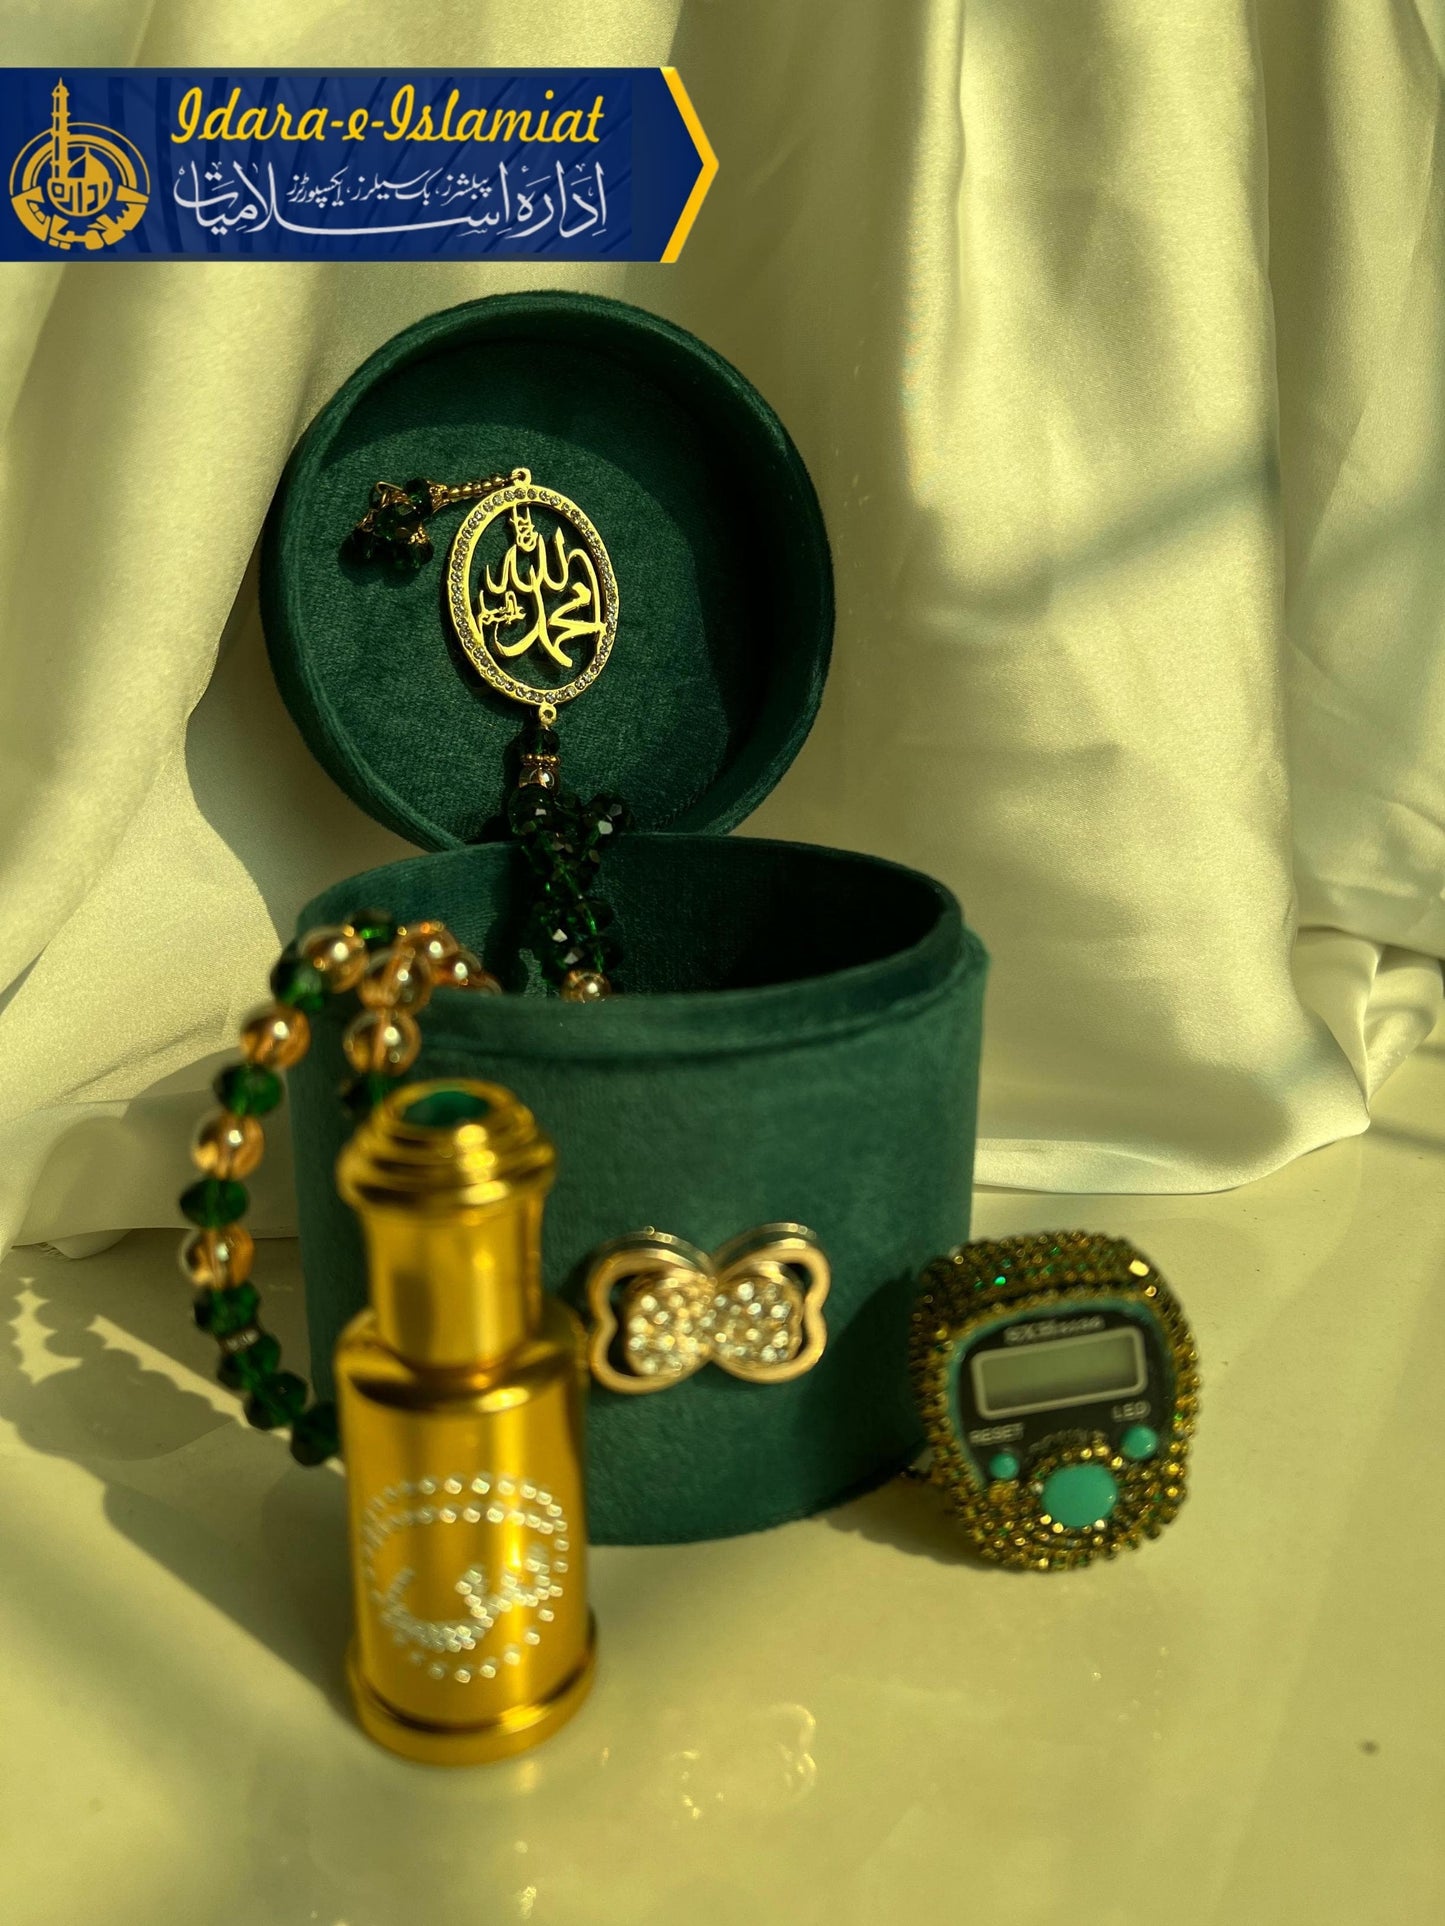 Velvet Tasbeeh box with ittar and Gold Plated Tasbeeh along with fancy counter